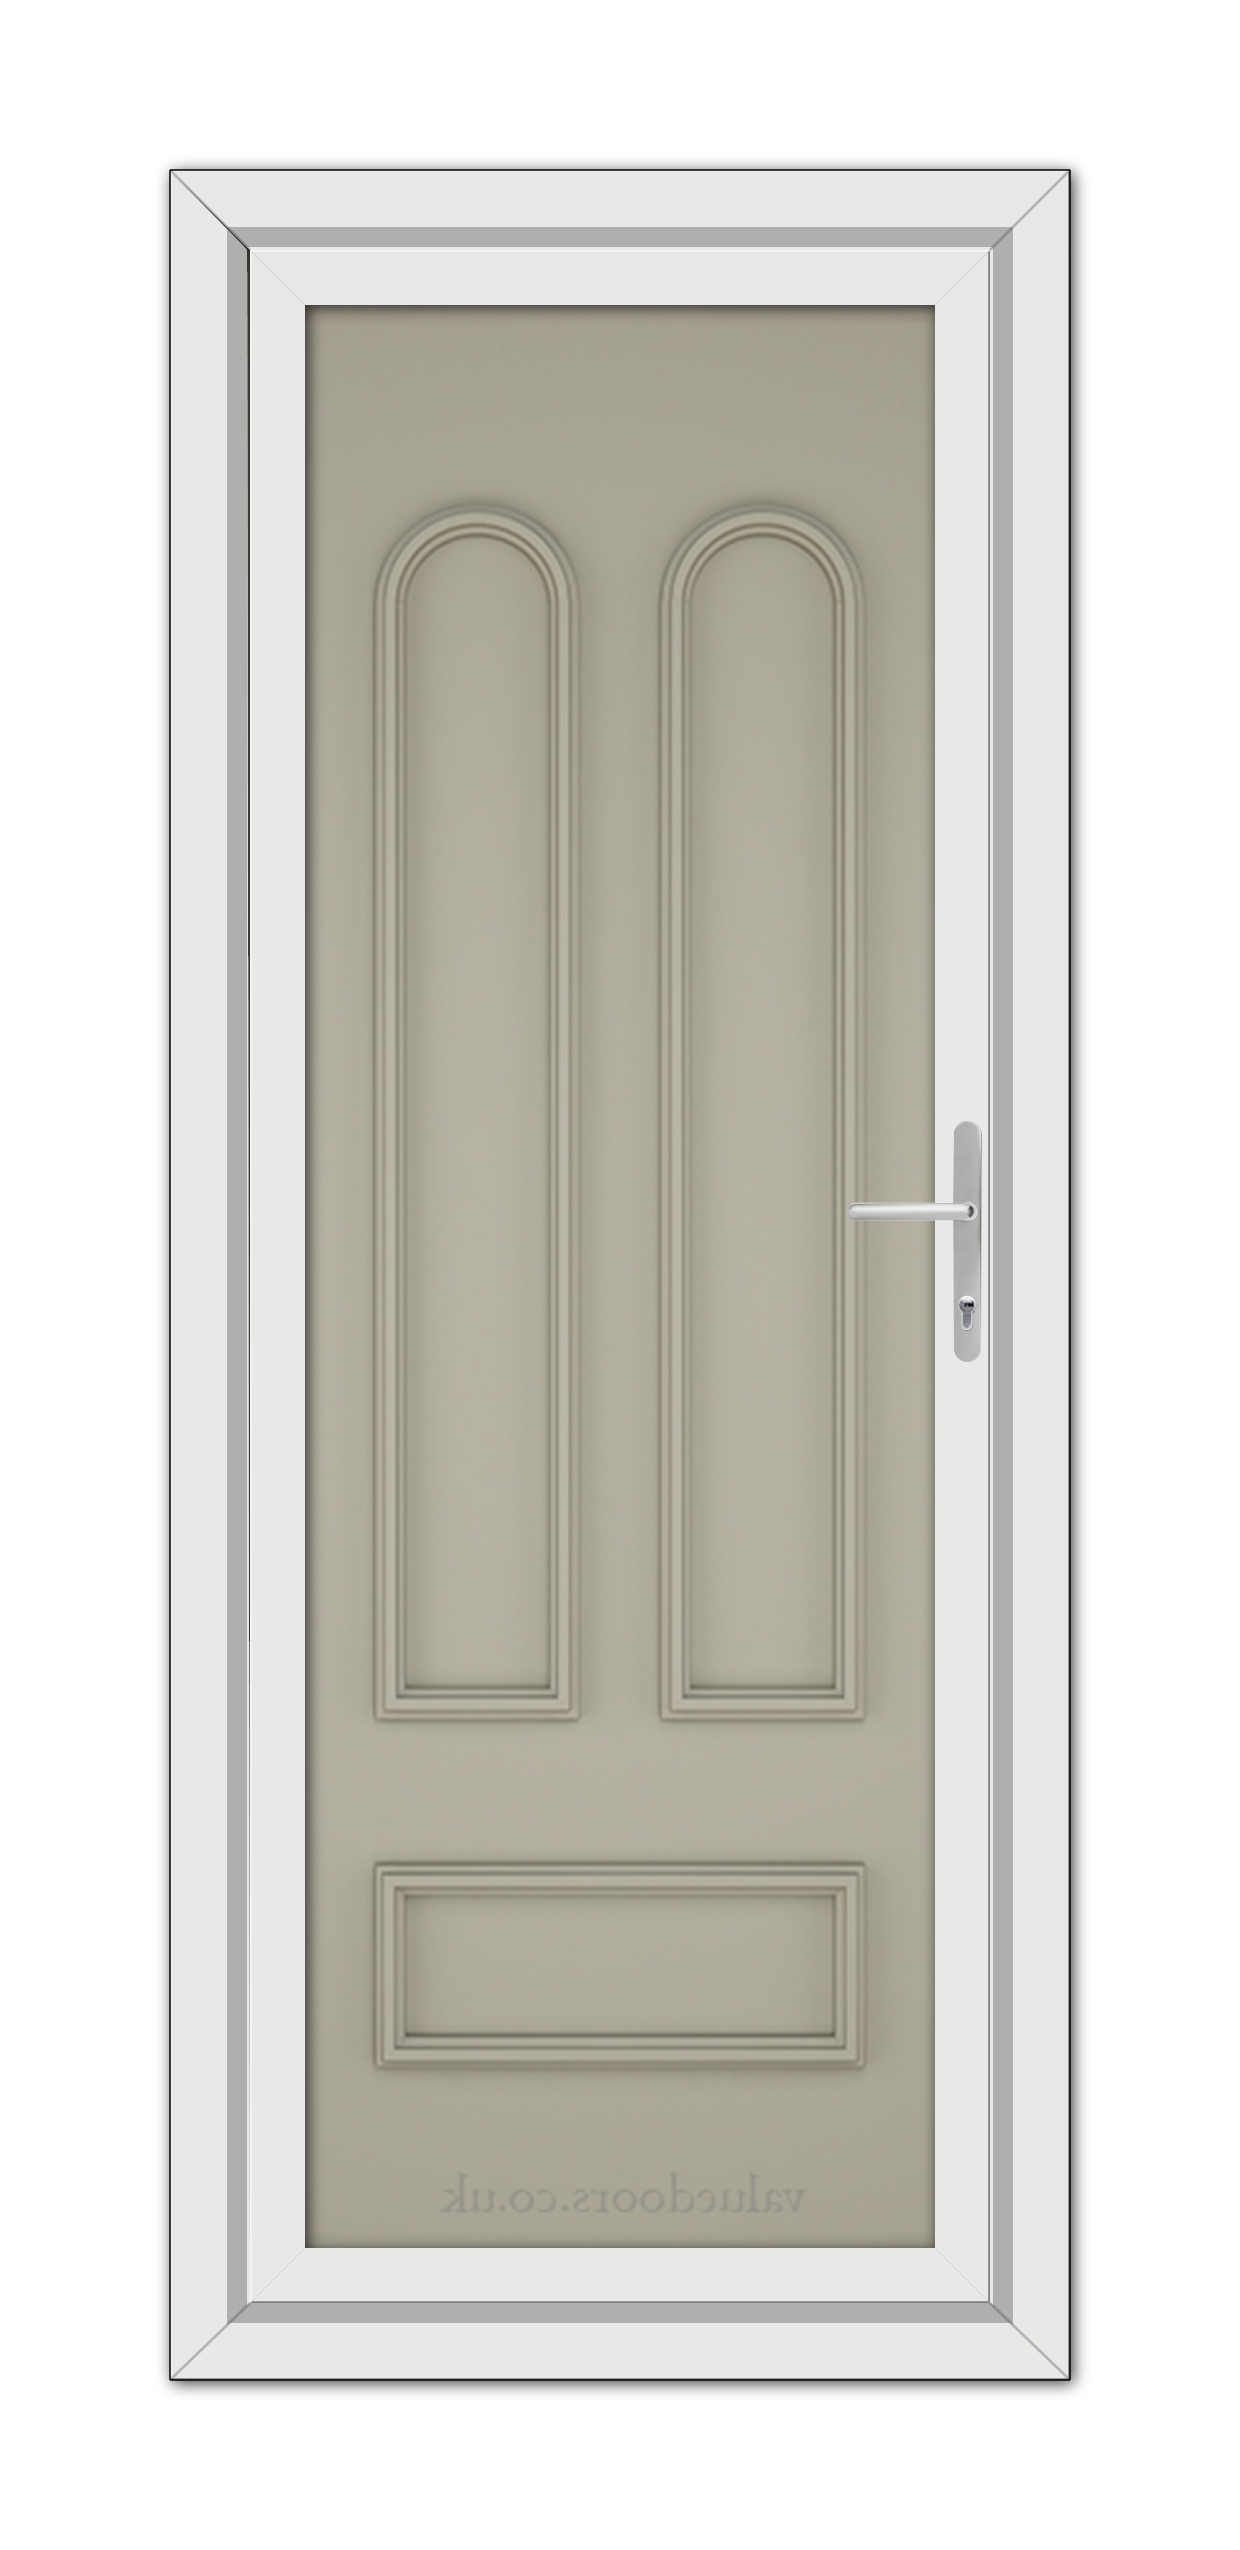 A modern beige Pebble Grey Madrid Solid uPVC Door with a long silver handle, set within a white frame, viewed from the front.